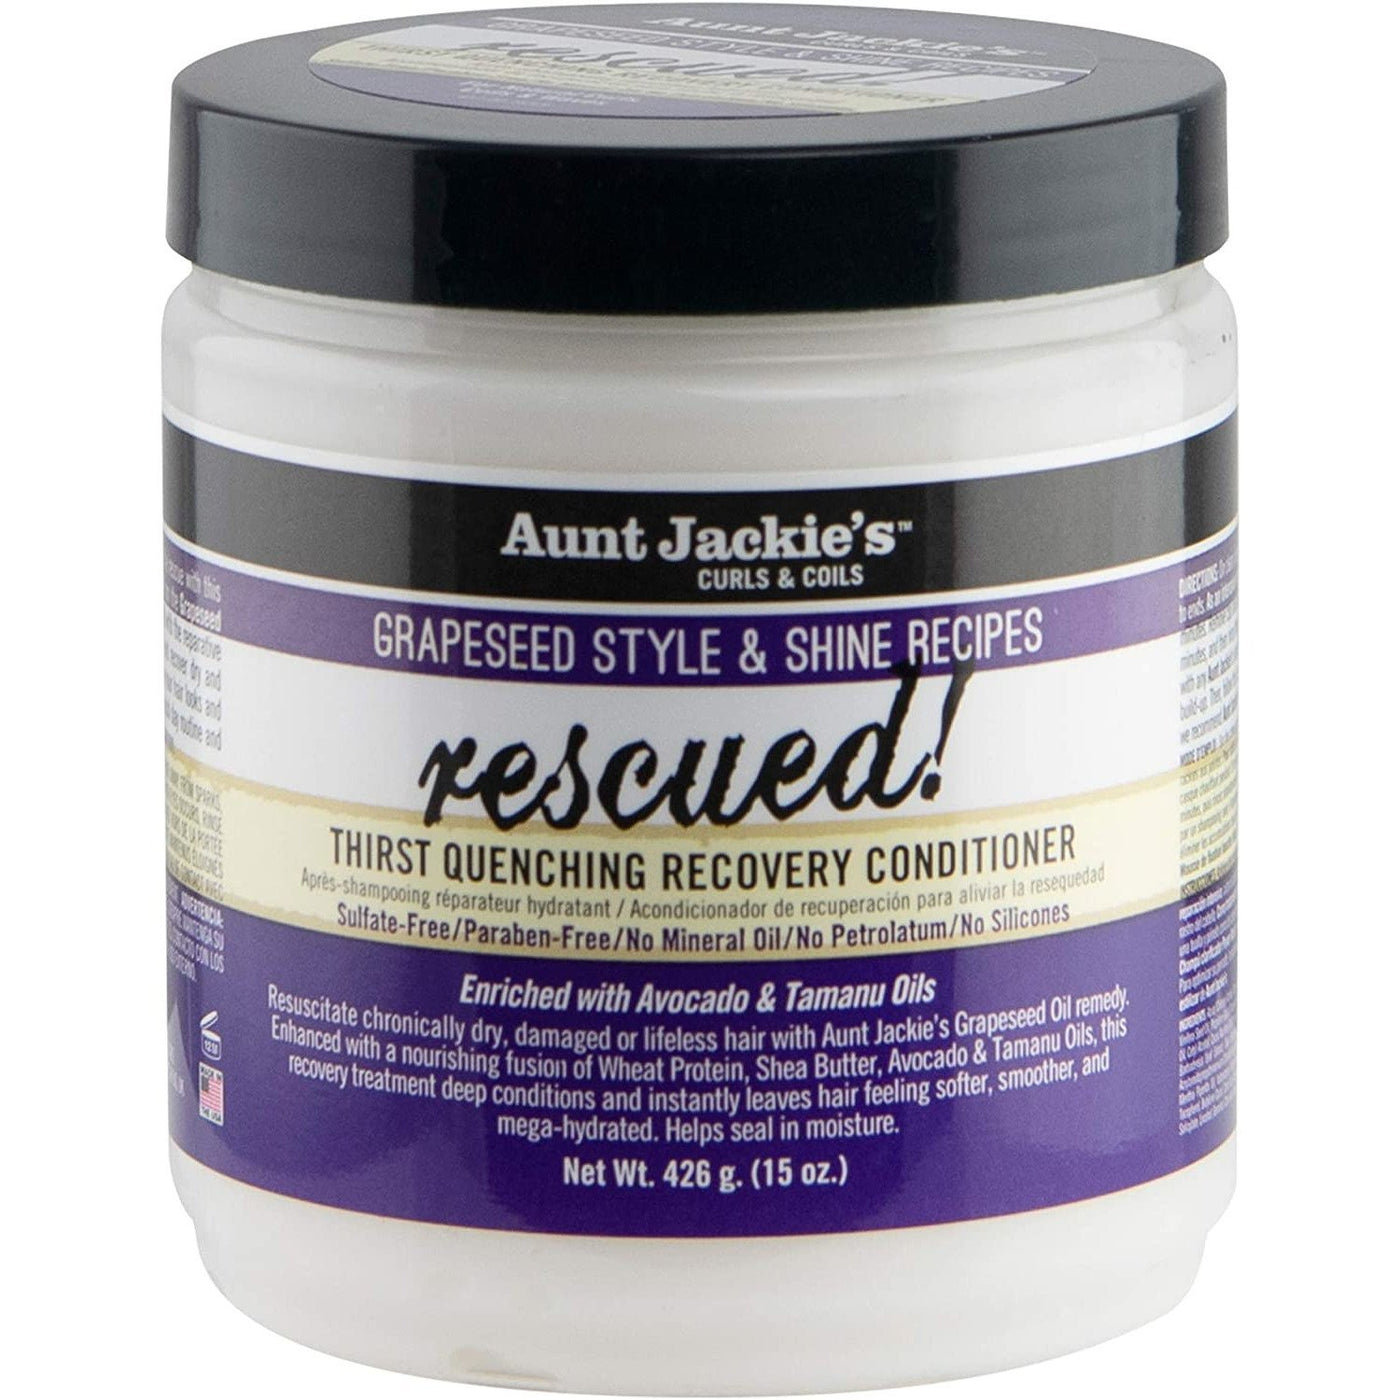 Aunt Jackie's Grapeseed Rescued! Thirst Quenching Recovery Conditioner 15oz - Manetain Beauty Supply